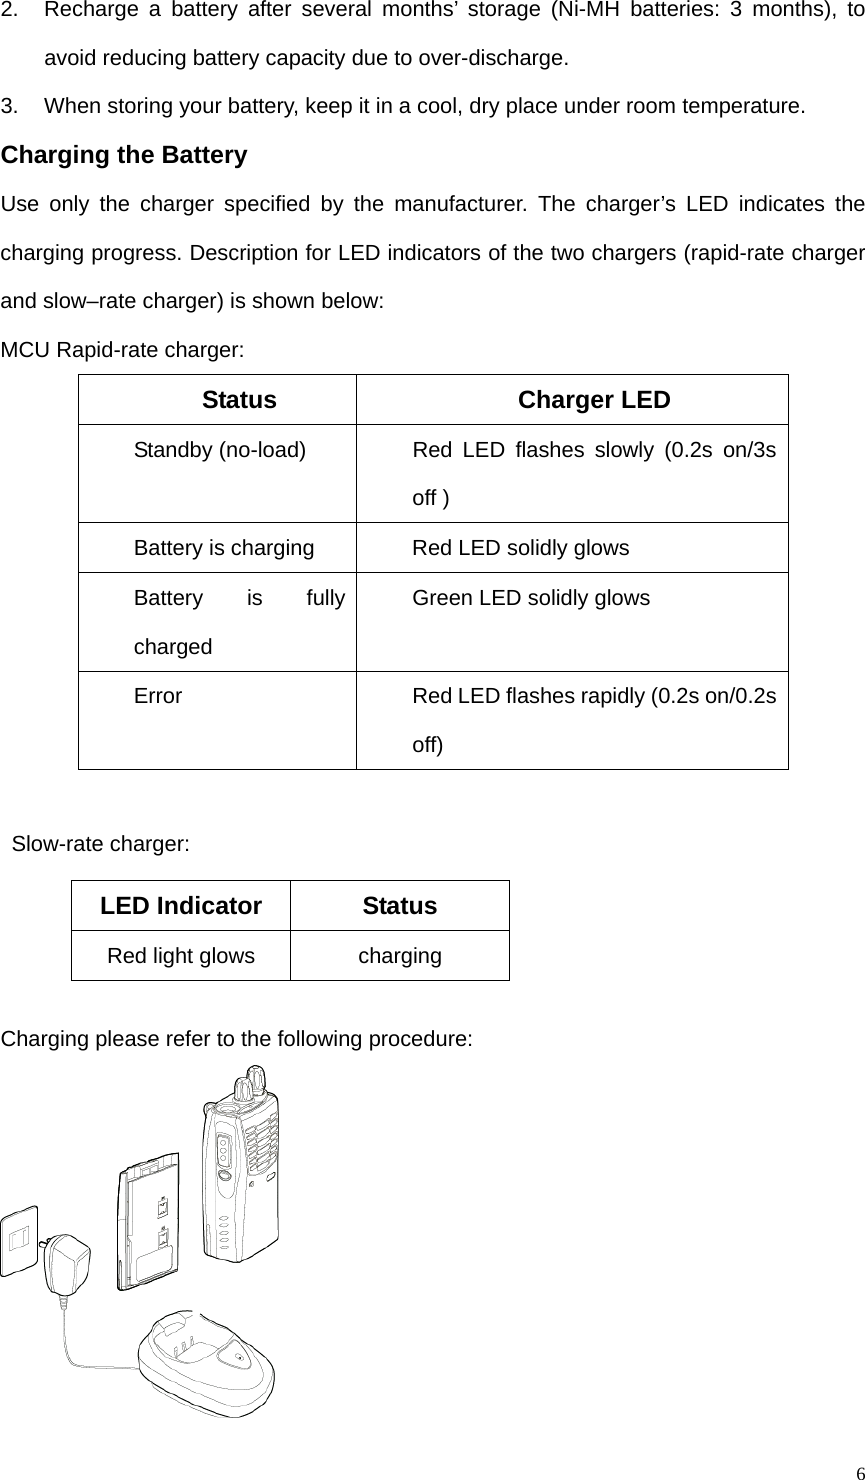   62.  Recharge a battery after several months’ storage (Ni-MH batteries: 3 months), to avoid reducing battery capacity due to over-discharge. 3.  When storing your battery, keep it in a cool, dry place under room temperature. Charging the Battery Use only the charger specified by the manufacturer. The charger’s LED indicates the charging progress. Description for LED indicators of the two chargers (rapid-rate charger and slow–rate charger) is shown below:   MCU Rapid-rate charger: Status Charger LED Standby (no-load)  Red LED flashes slowly (0.2s on/3s off ) Battery is charging  Red LED solidly glows Battery is fully charged Green LED solidly glows Error  Red LED flashes rapidly (0.2s on/0.2s off)      Slow-rate charger:    Charging please refer to the following procedure:  LED Indicator    Status Red light glows      charging 